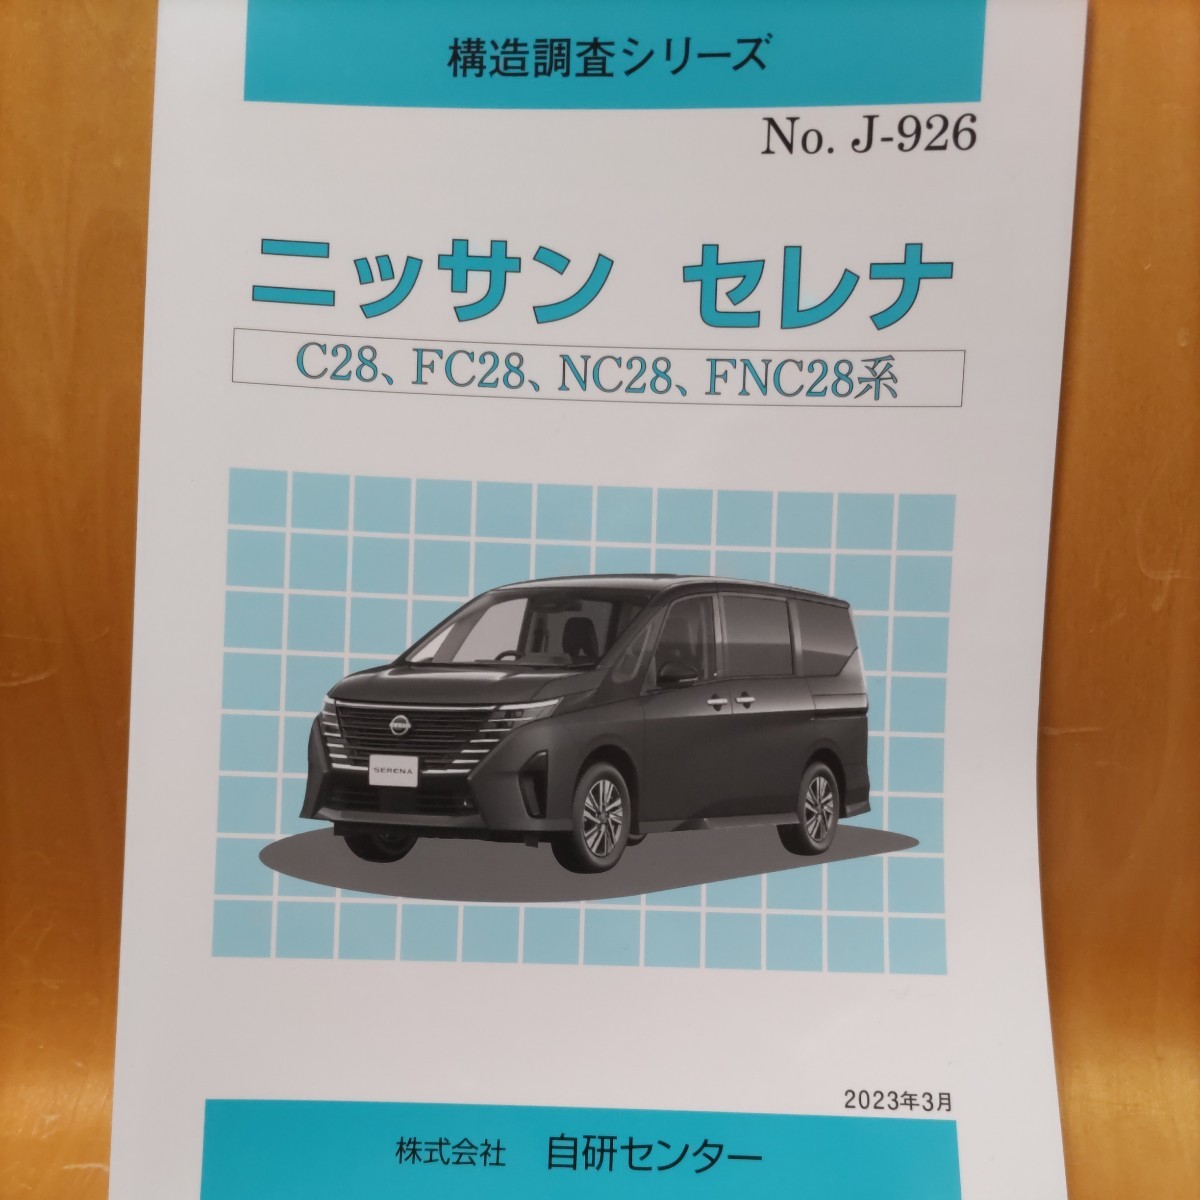 [ rare ] structure investigation series Nissan Serena C28,FC28,NC28,FNC28 series [ great popularity ]